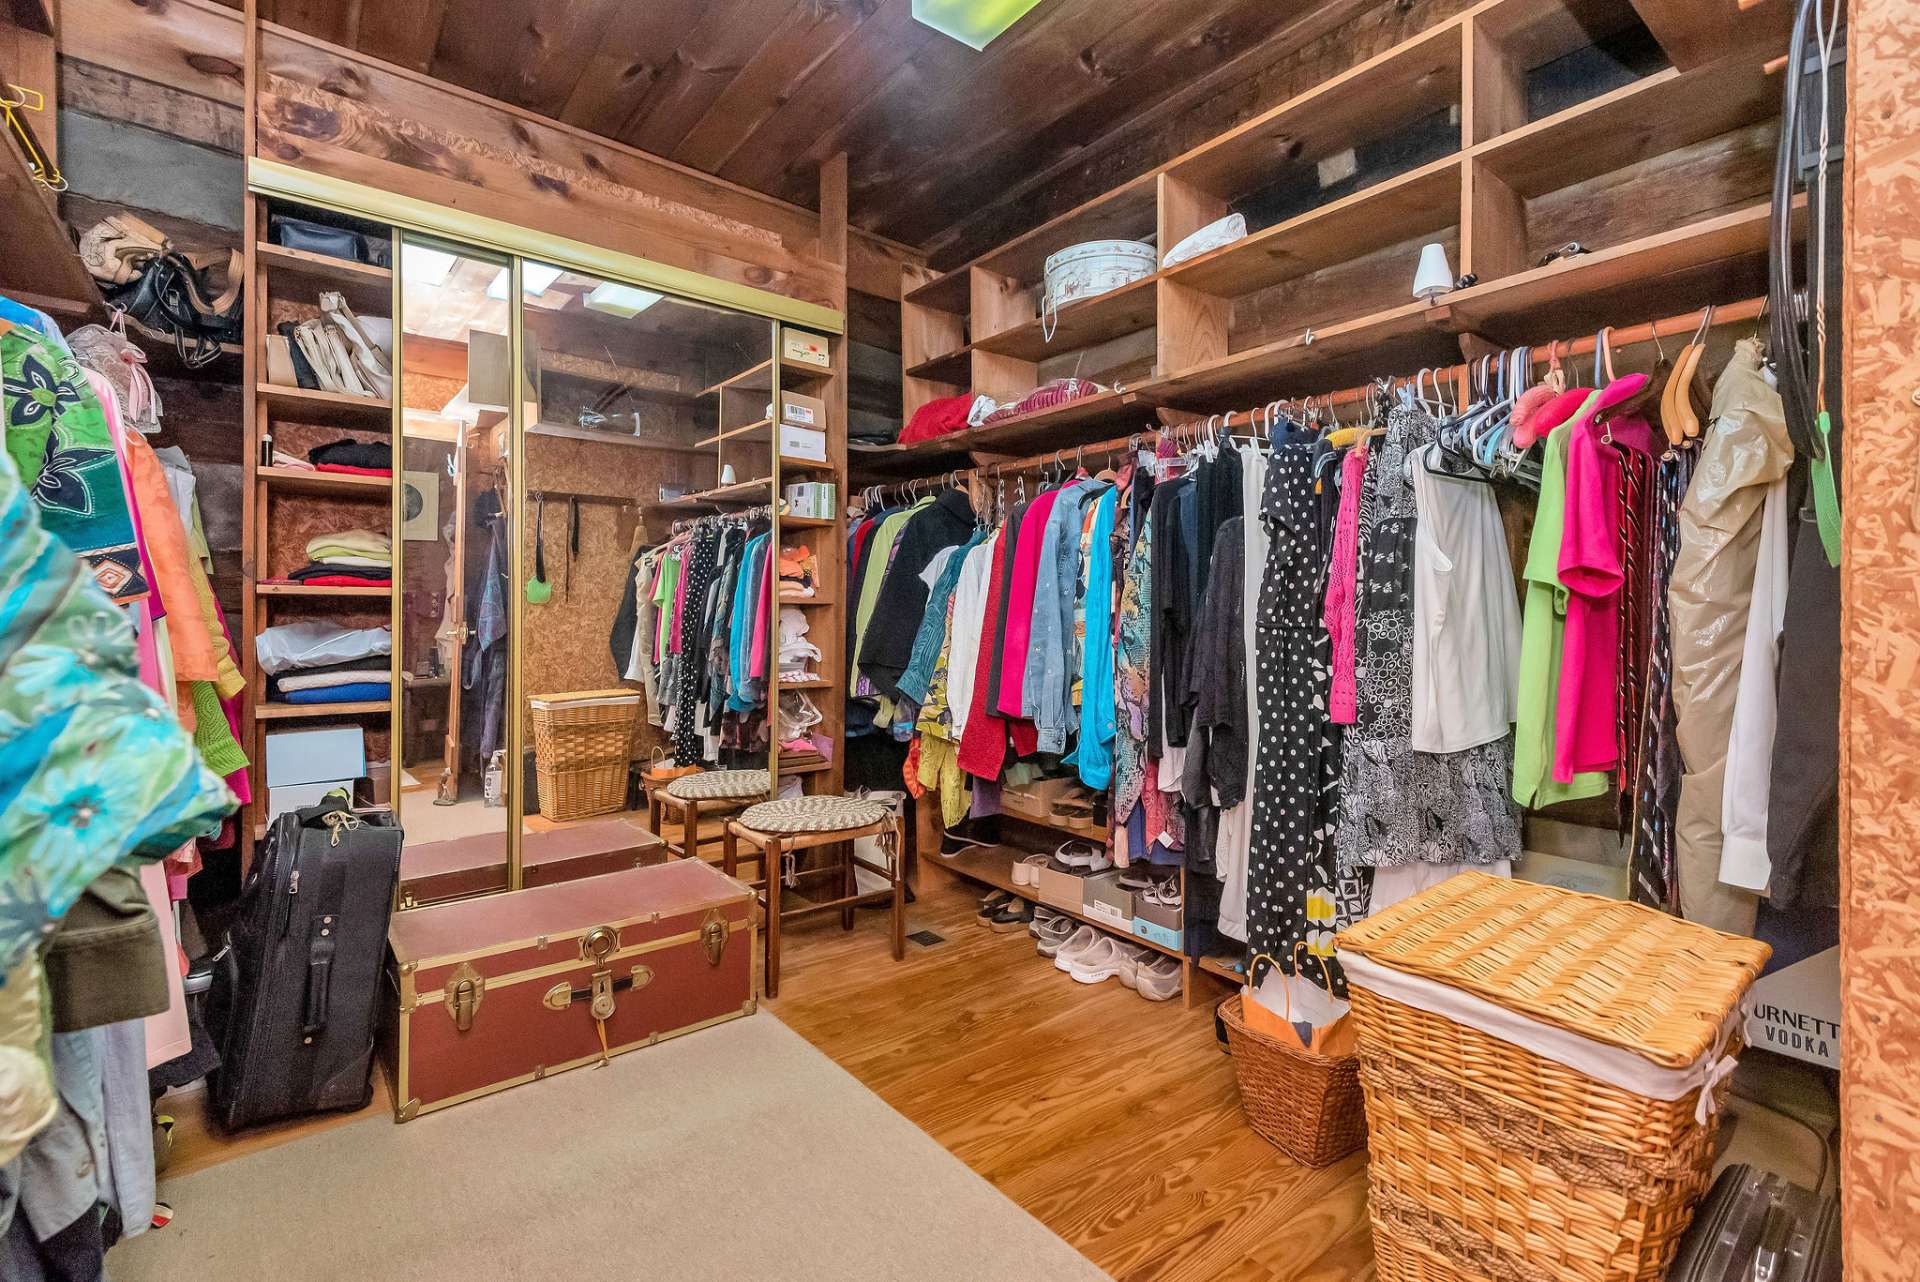 This sizable master closet is uncommon for a mountain cabin.